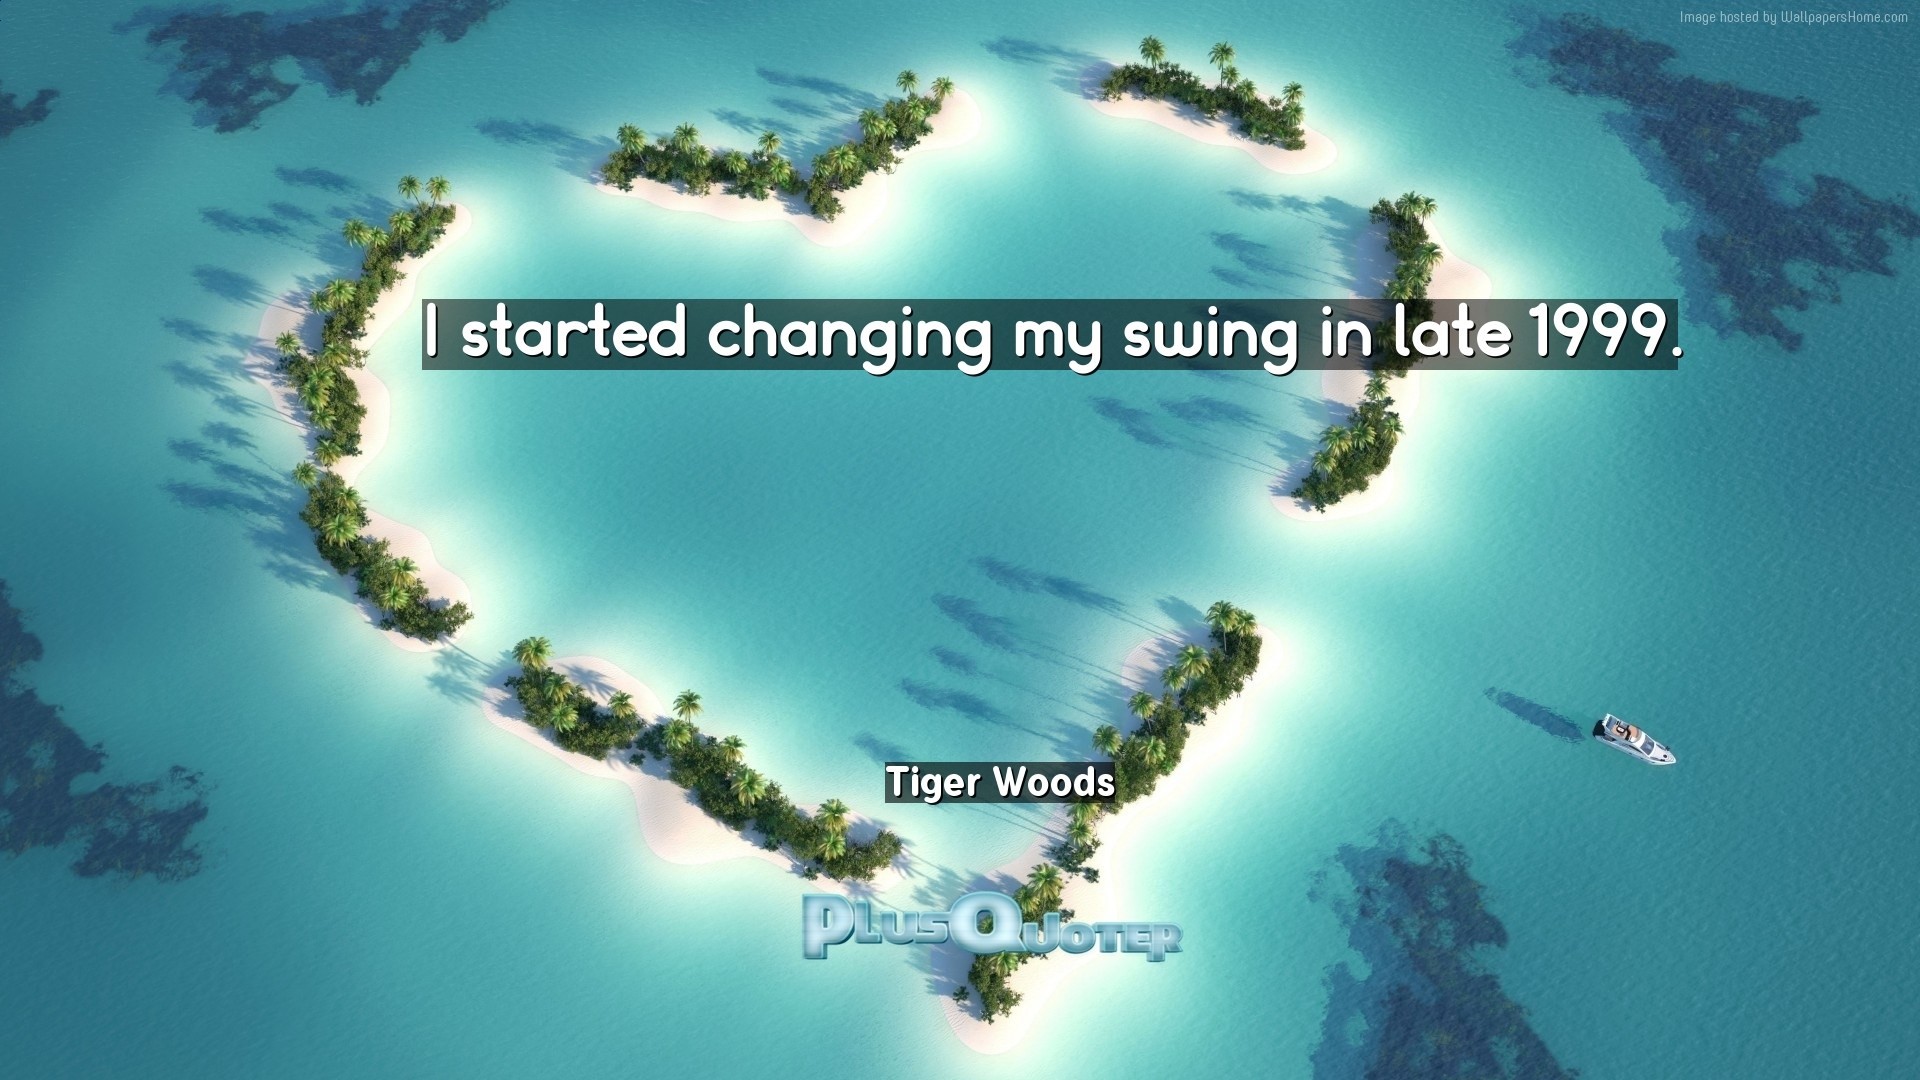 1920x1080 Download Wallpaper with inspirational Quotes- "I started changing my swing  in late 1999.